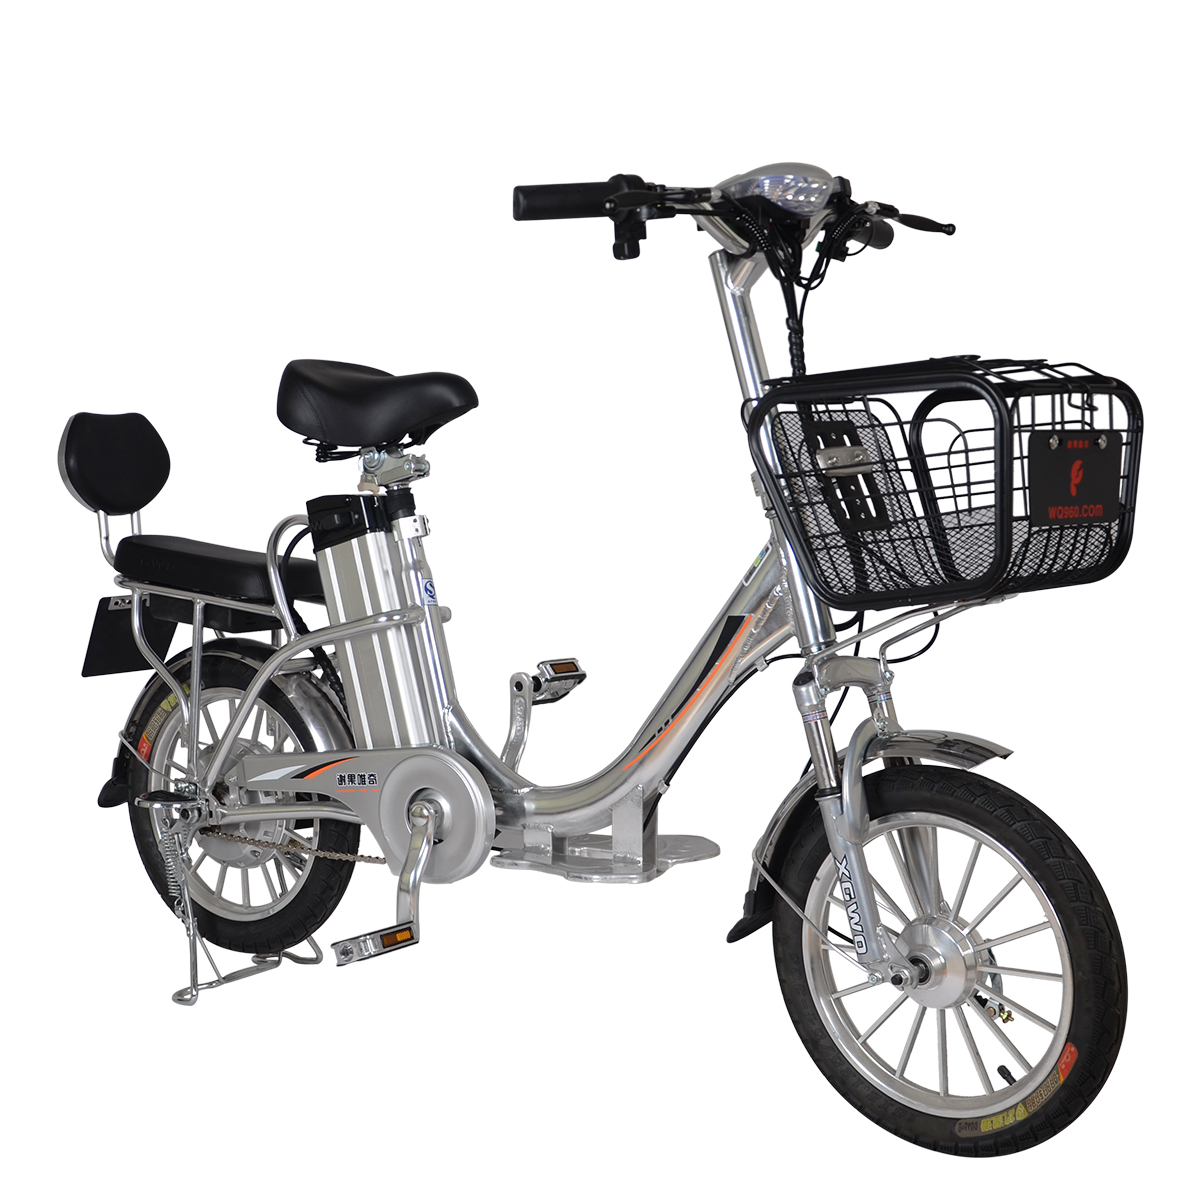 Flyer Electric Bikes expanding distribution, offering free e-bike to shops | Bicycle Retailer and Industry News